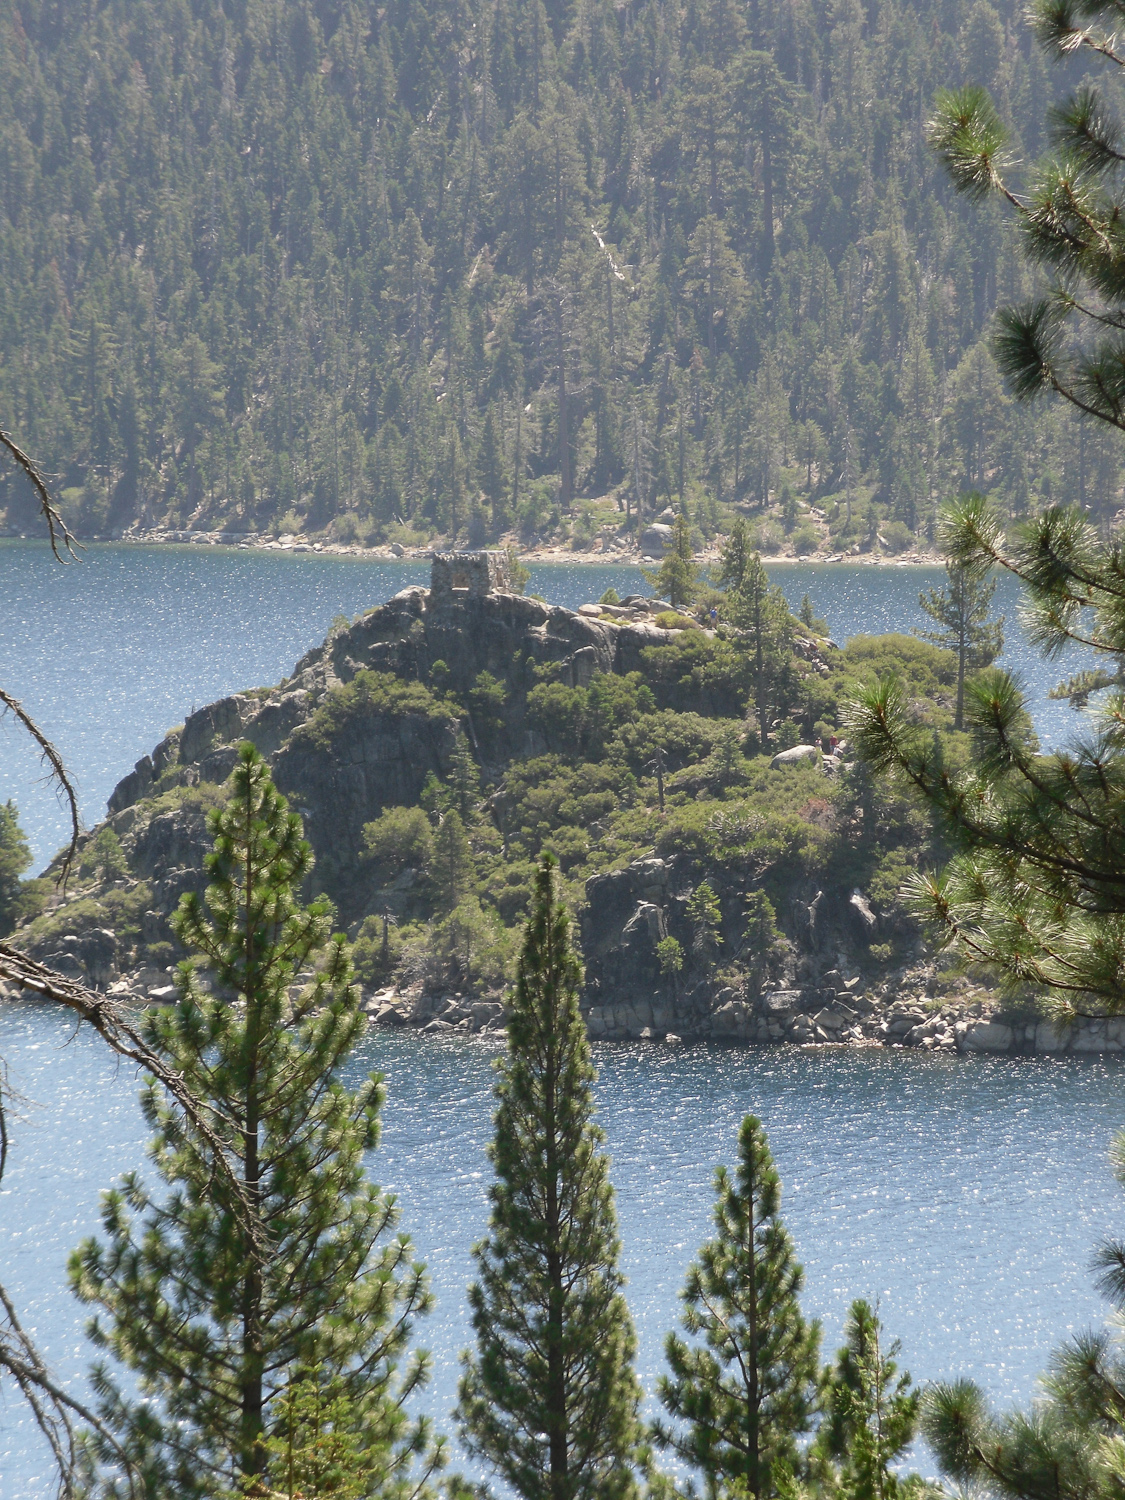 Views of Fannette Island in Emerald Bay from trail to Vikingsholm